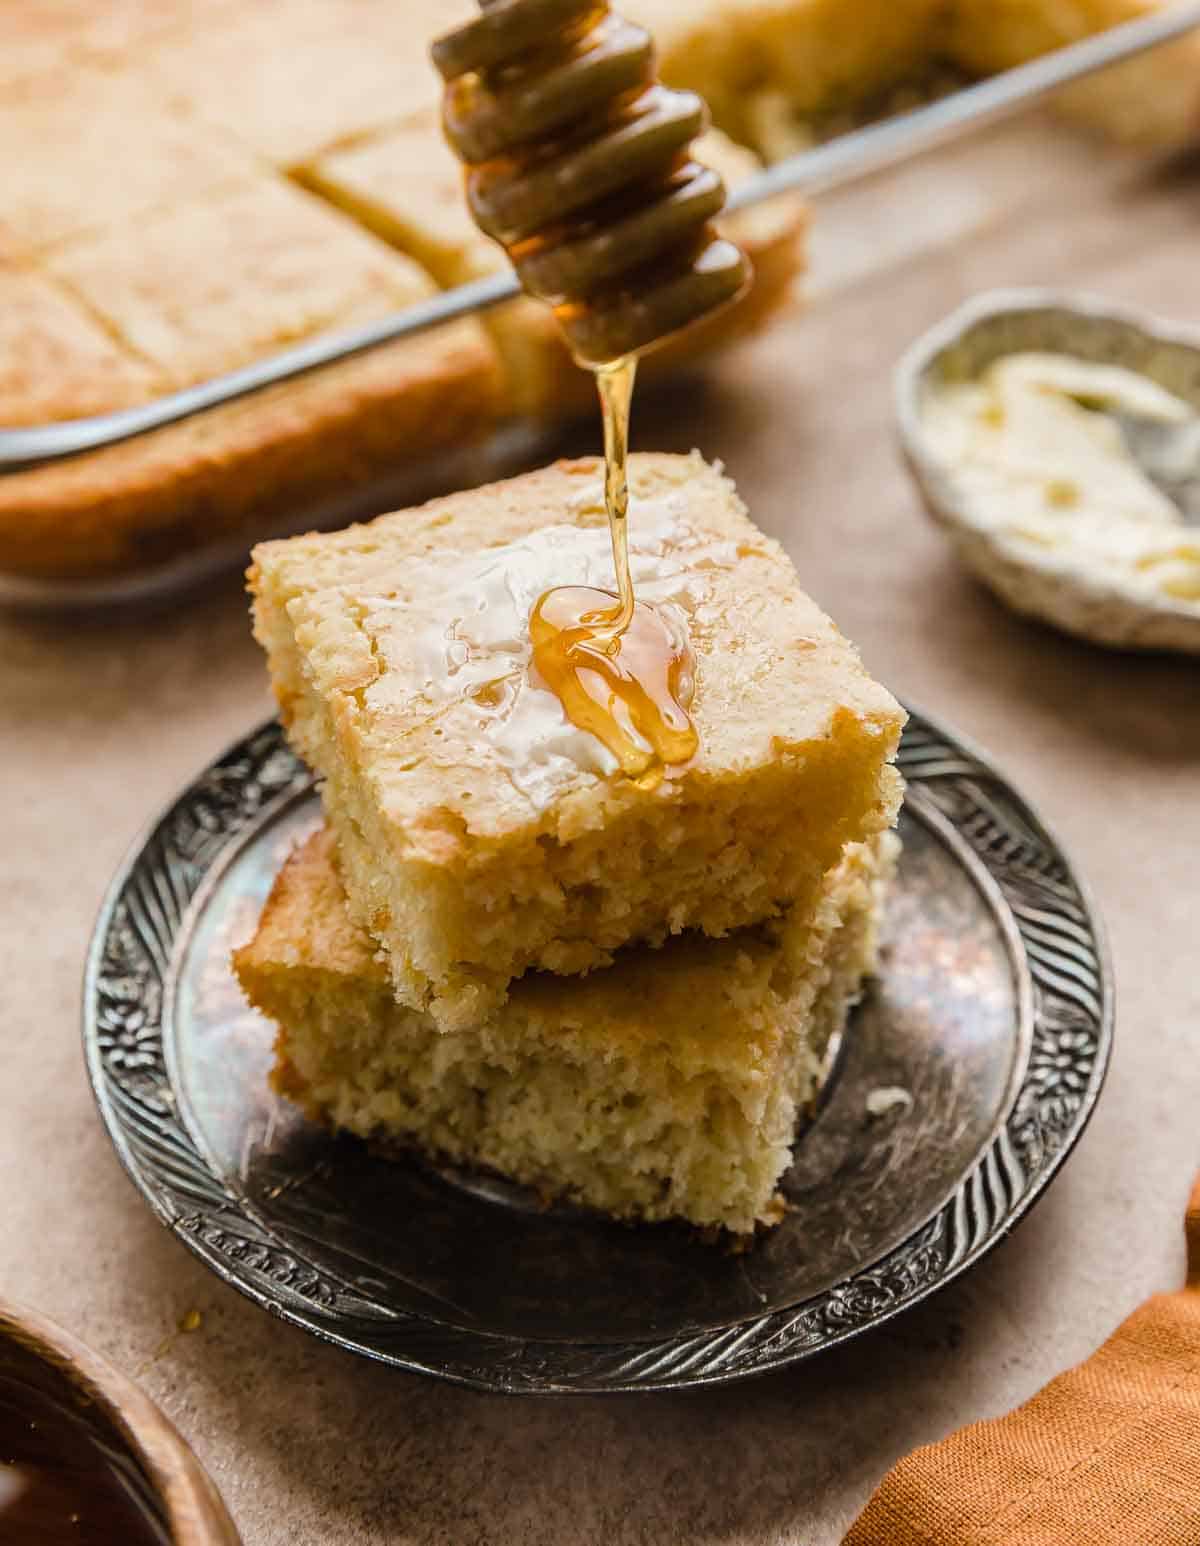 Honey being drizzled over a slice of homemade cornbread made with Bisquick.